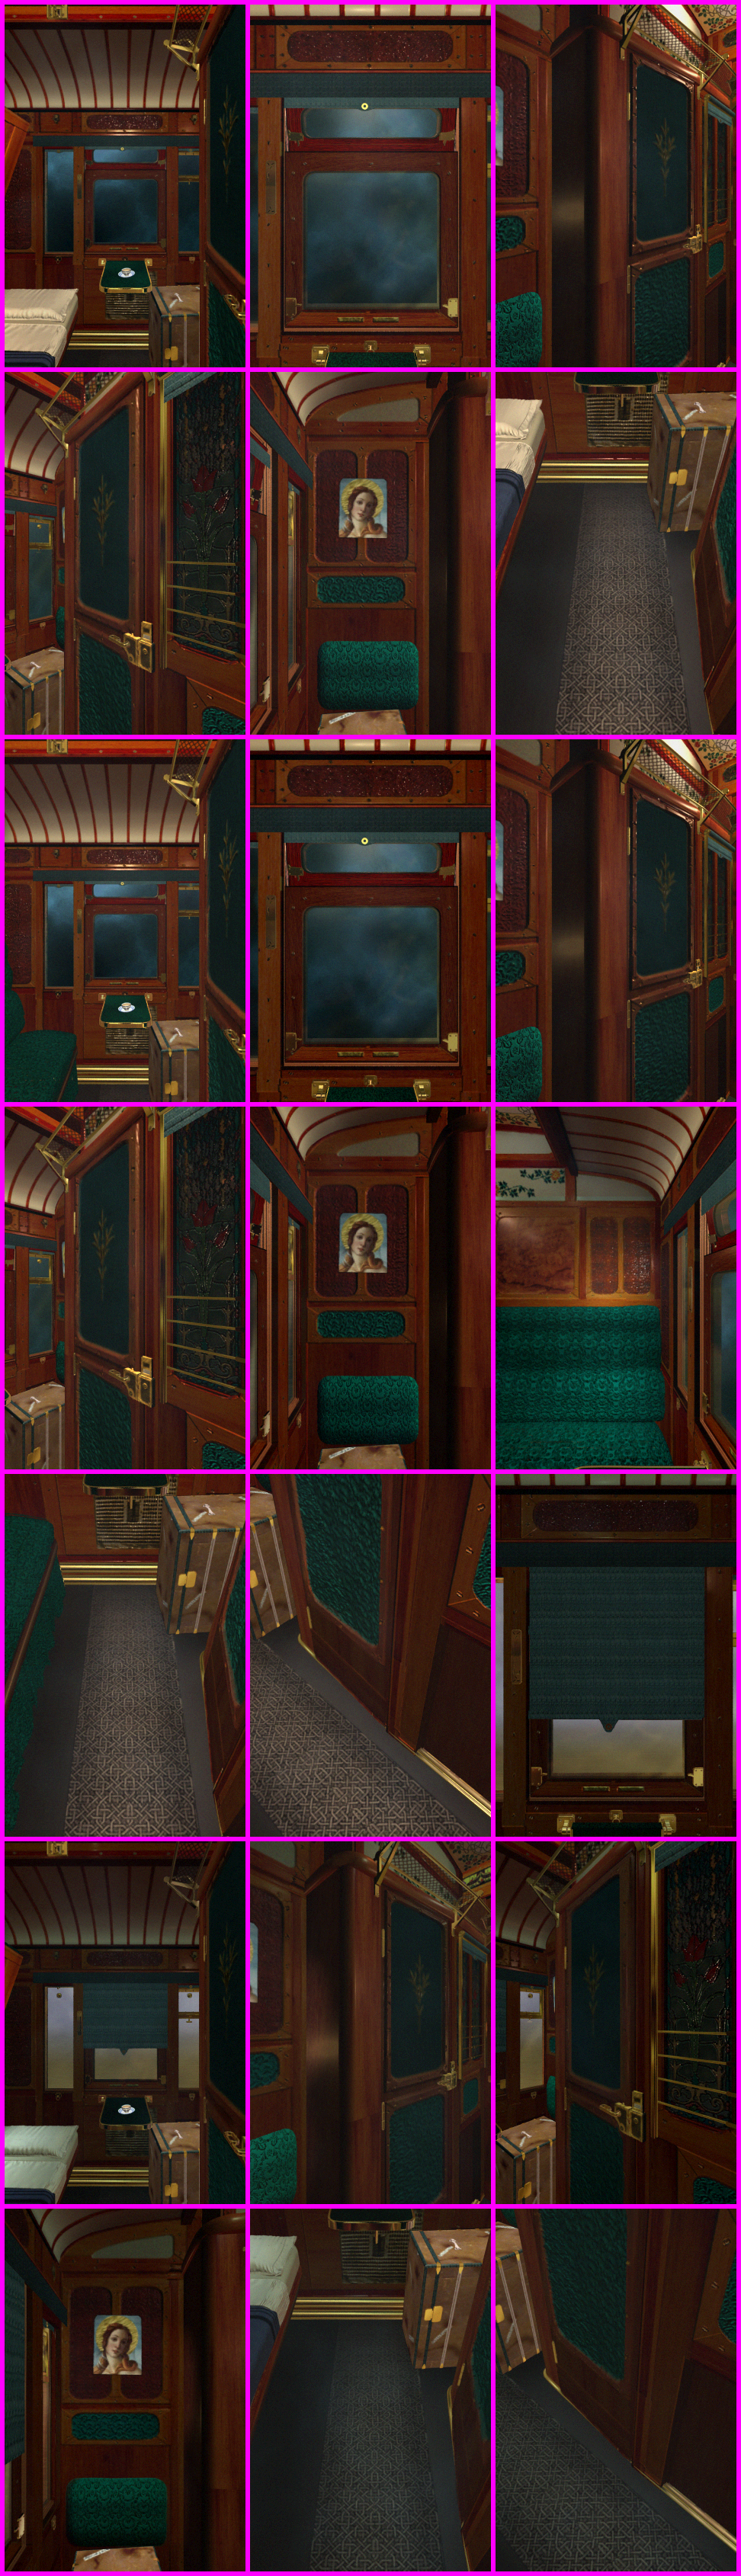 The Last Express - Compartment A